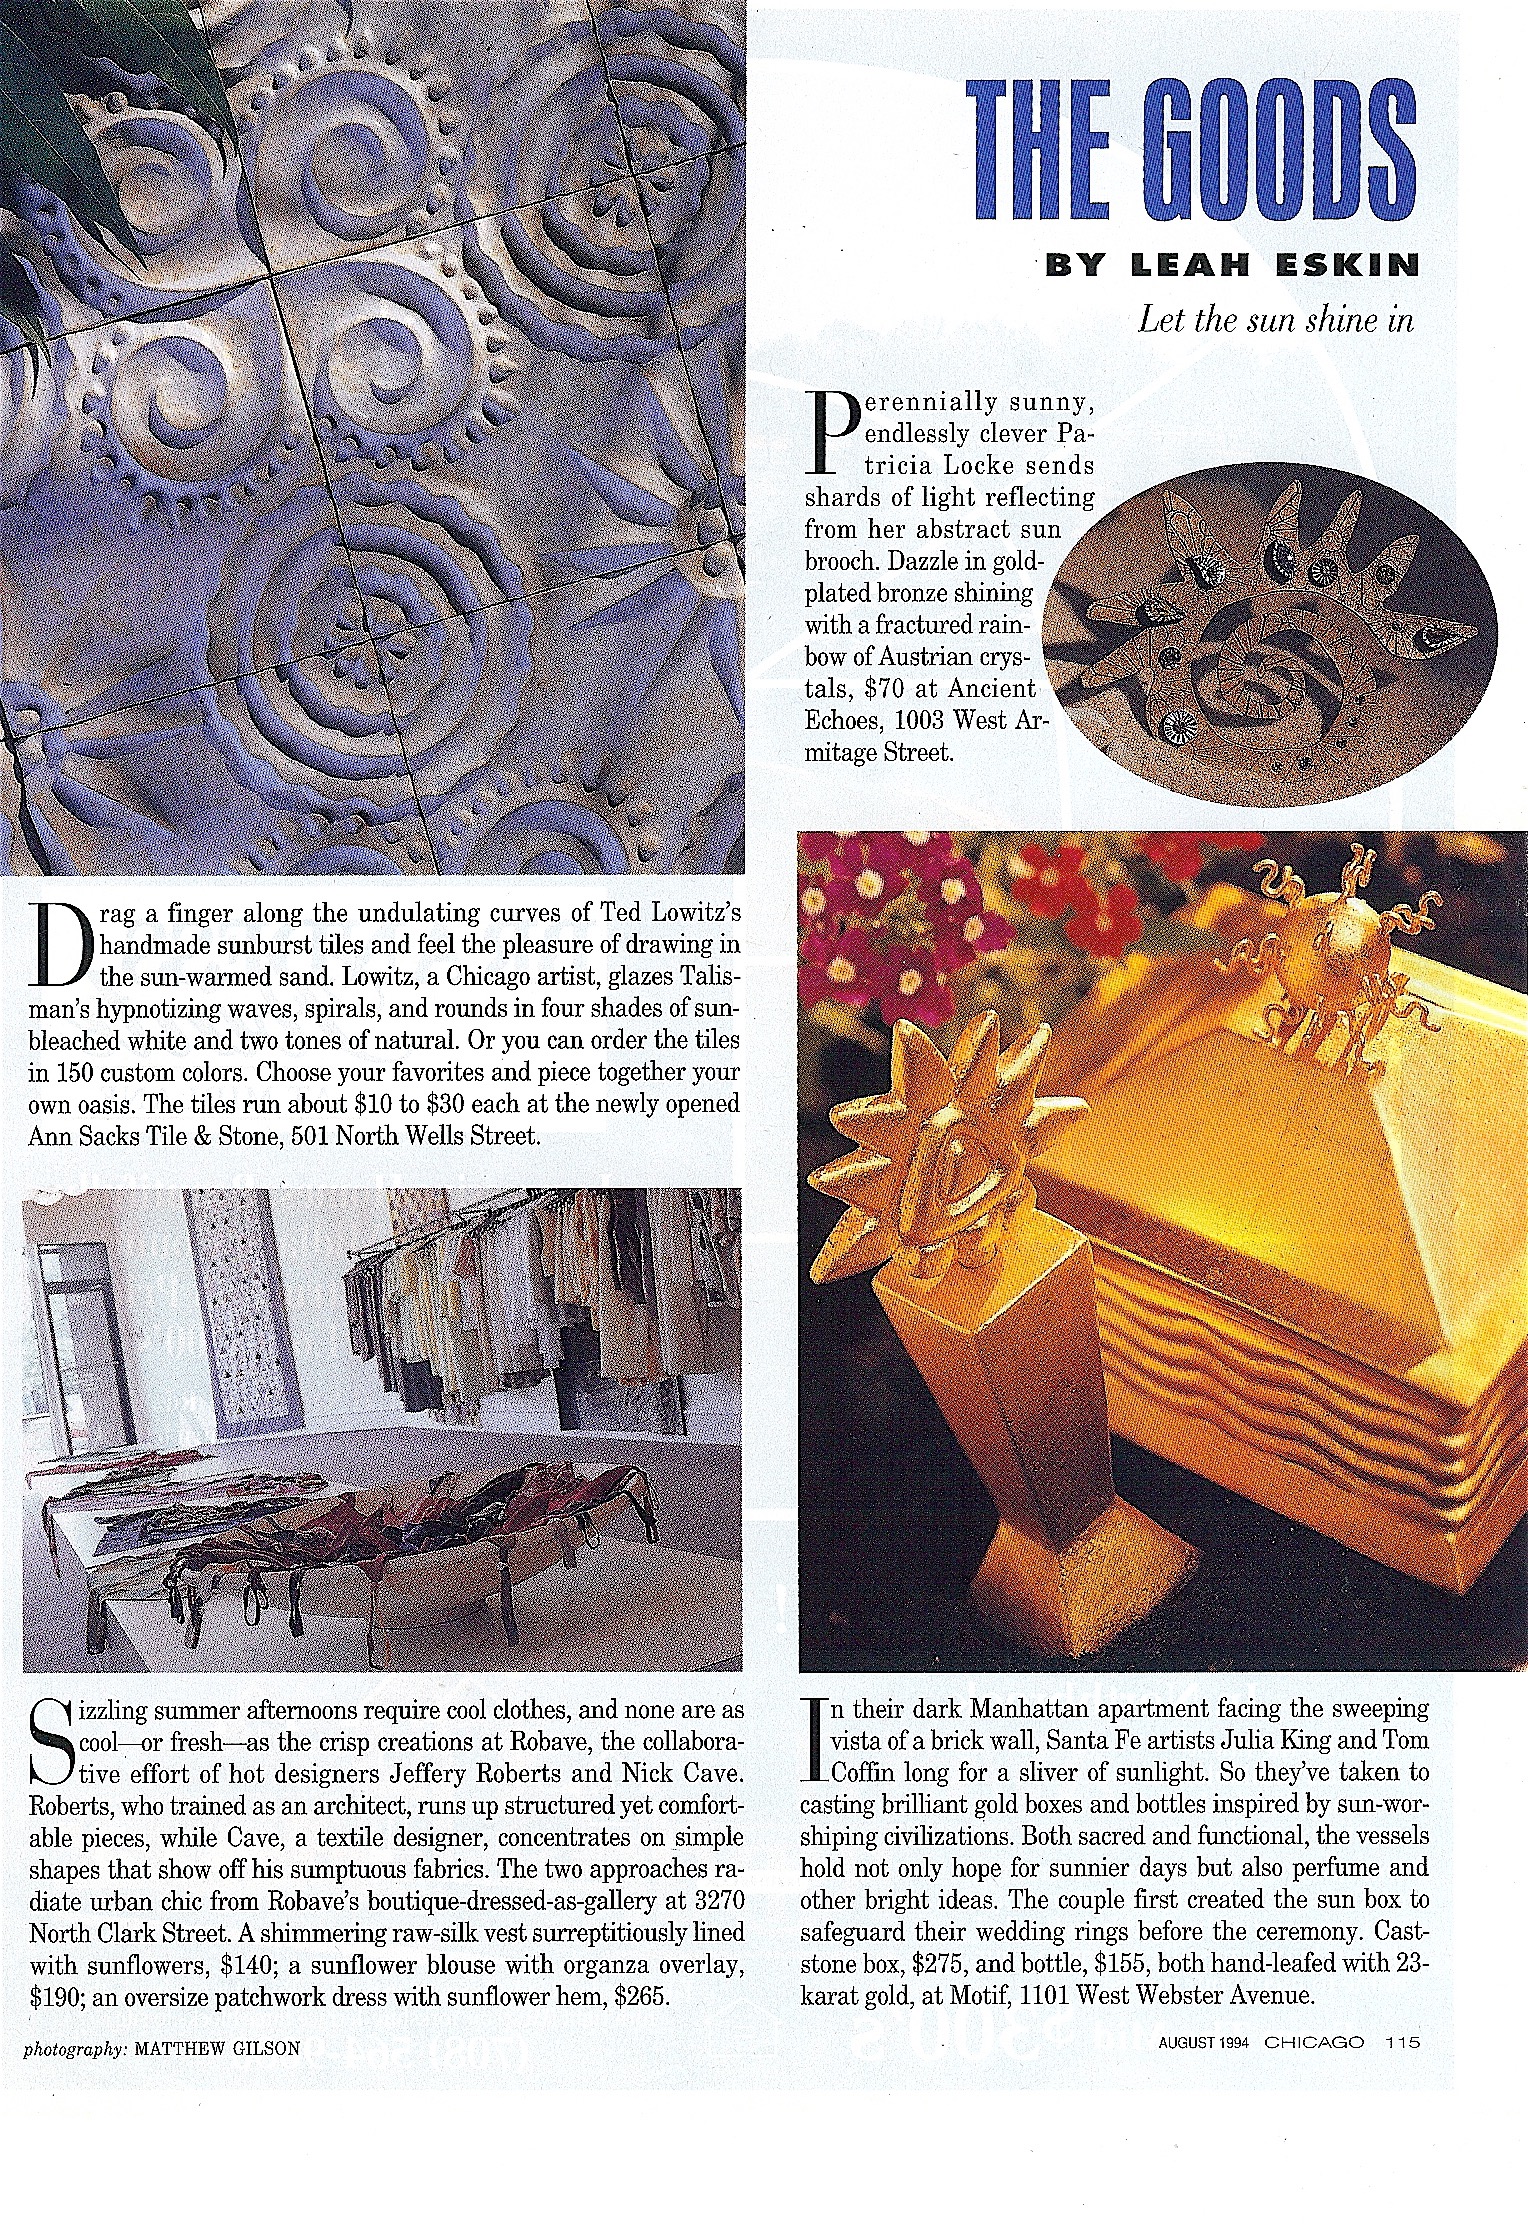 Coffin & King Press - Coffin & King Gilded Sun Head Box and Golden Idol perfume bottle featured in Chicago Magazine